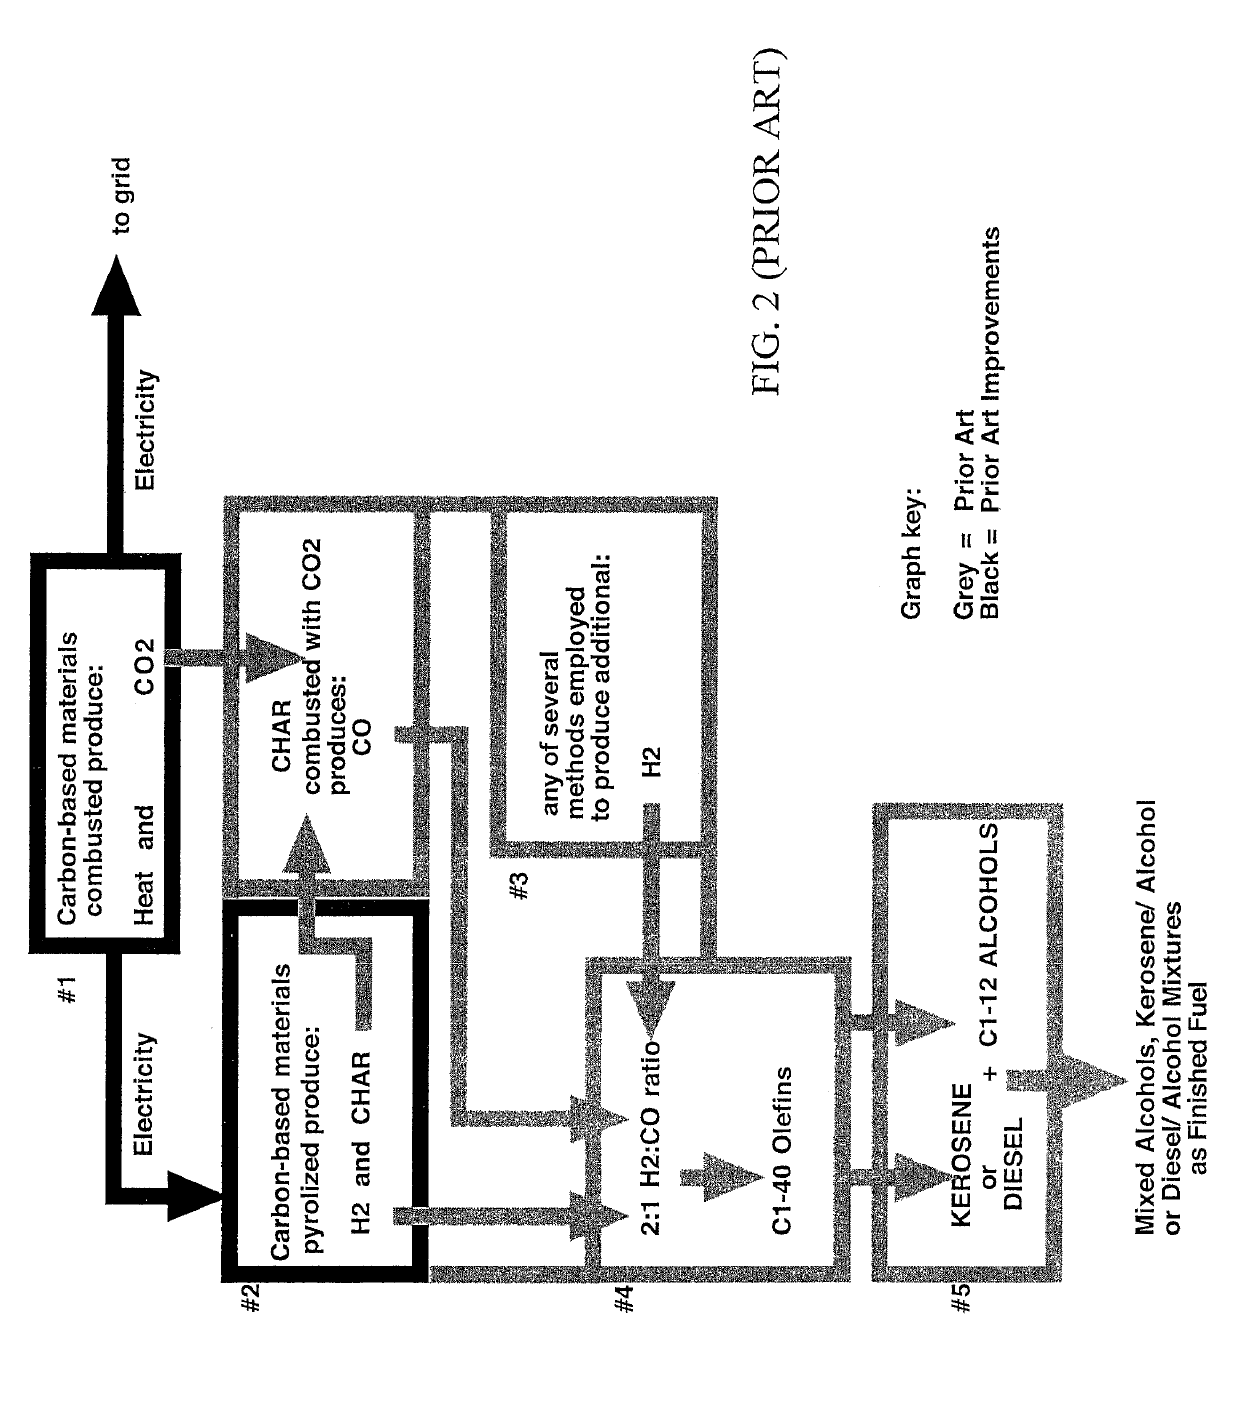 Production and use of ultra-clean carbon compounds and uniform heat from carbon-based feedstocks